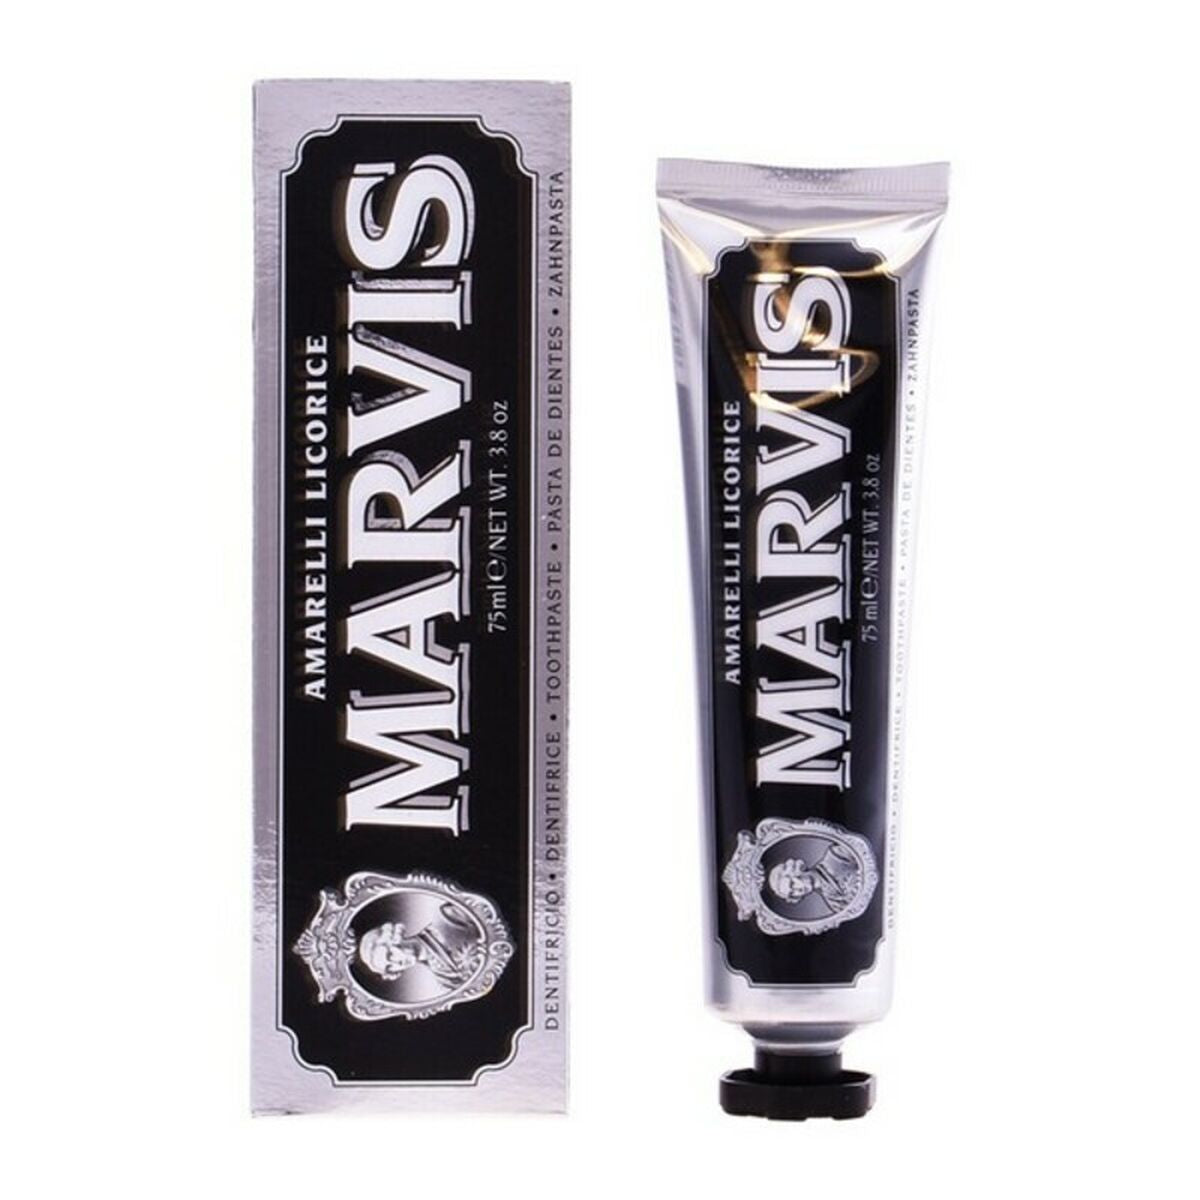 Fresh Breath Toothpaste Licorize Mint Marvis (85 ml)